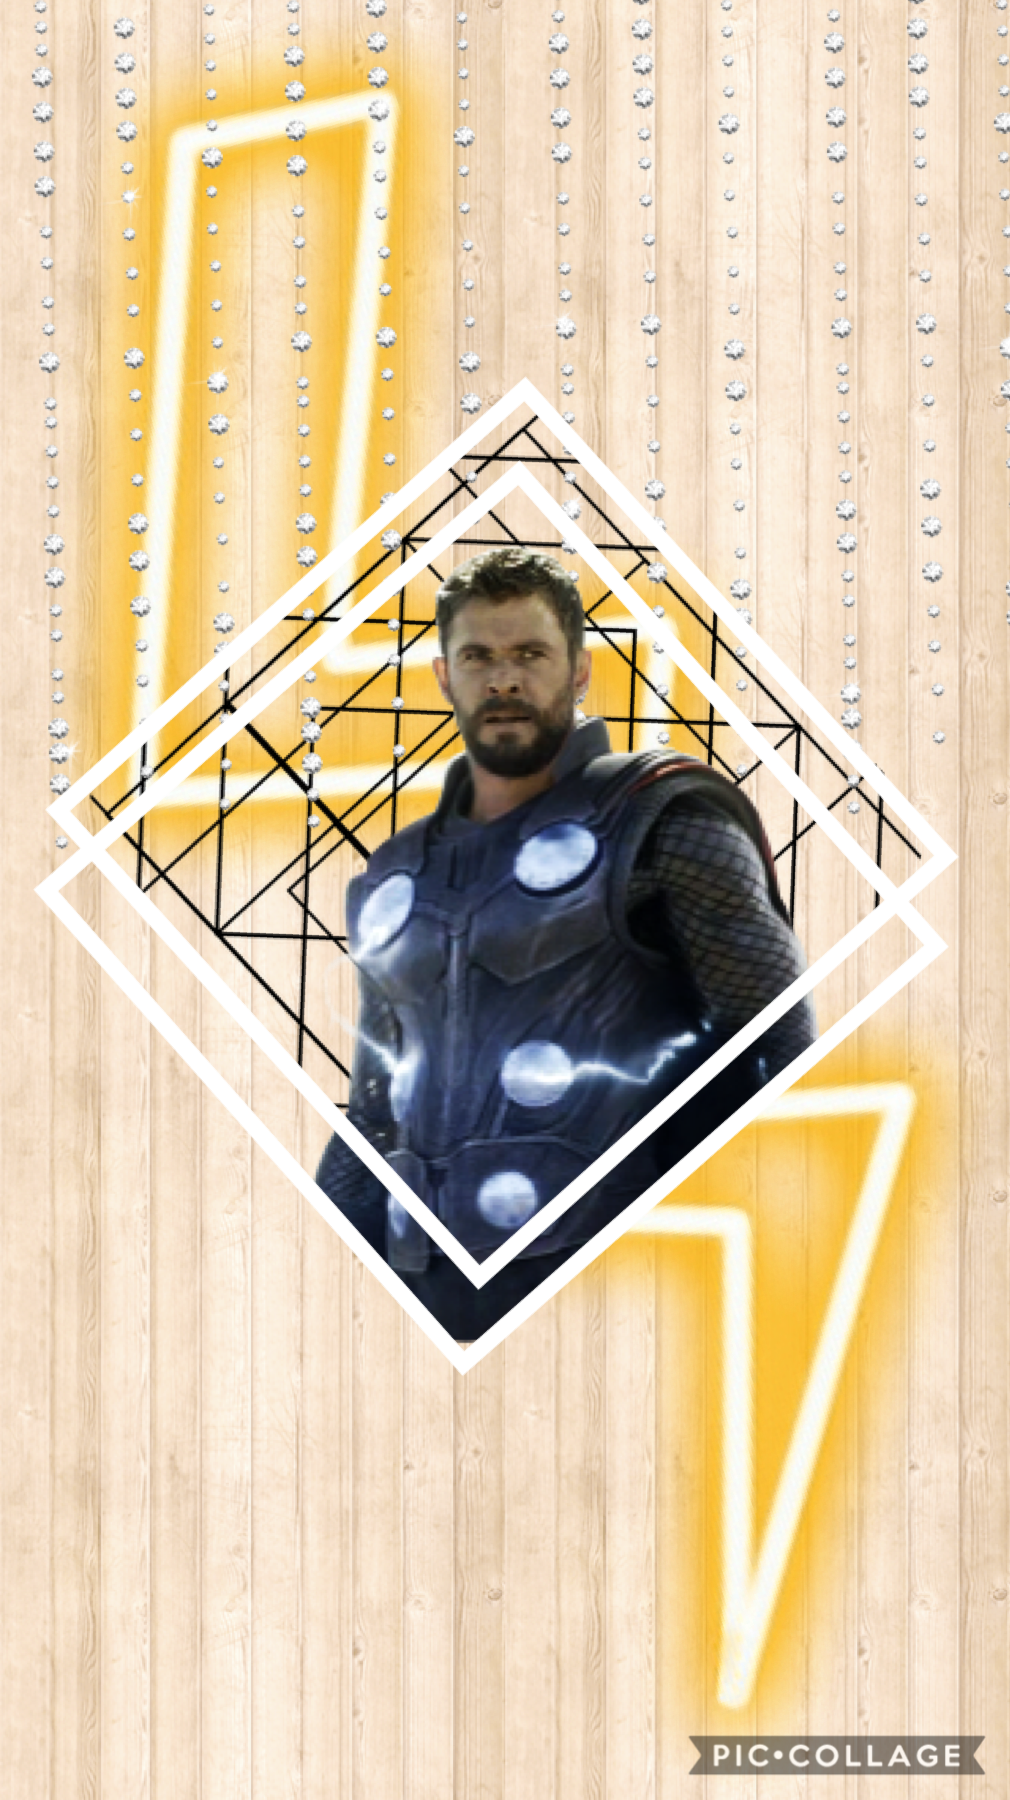 My sister made this one means the next two posts. Thor